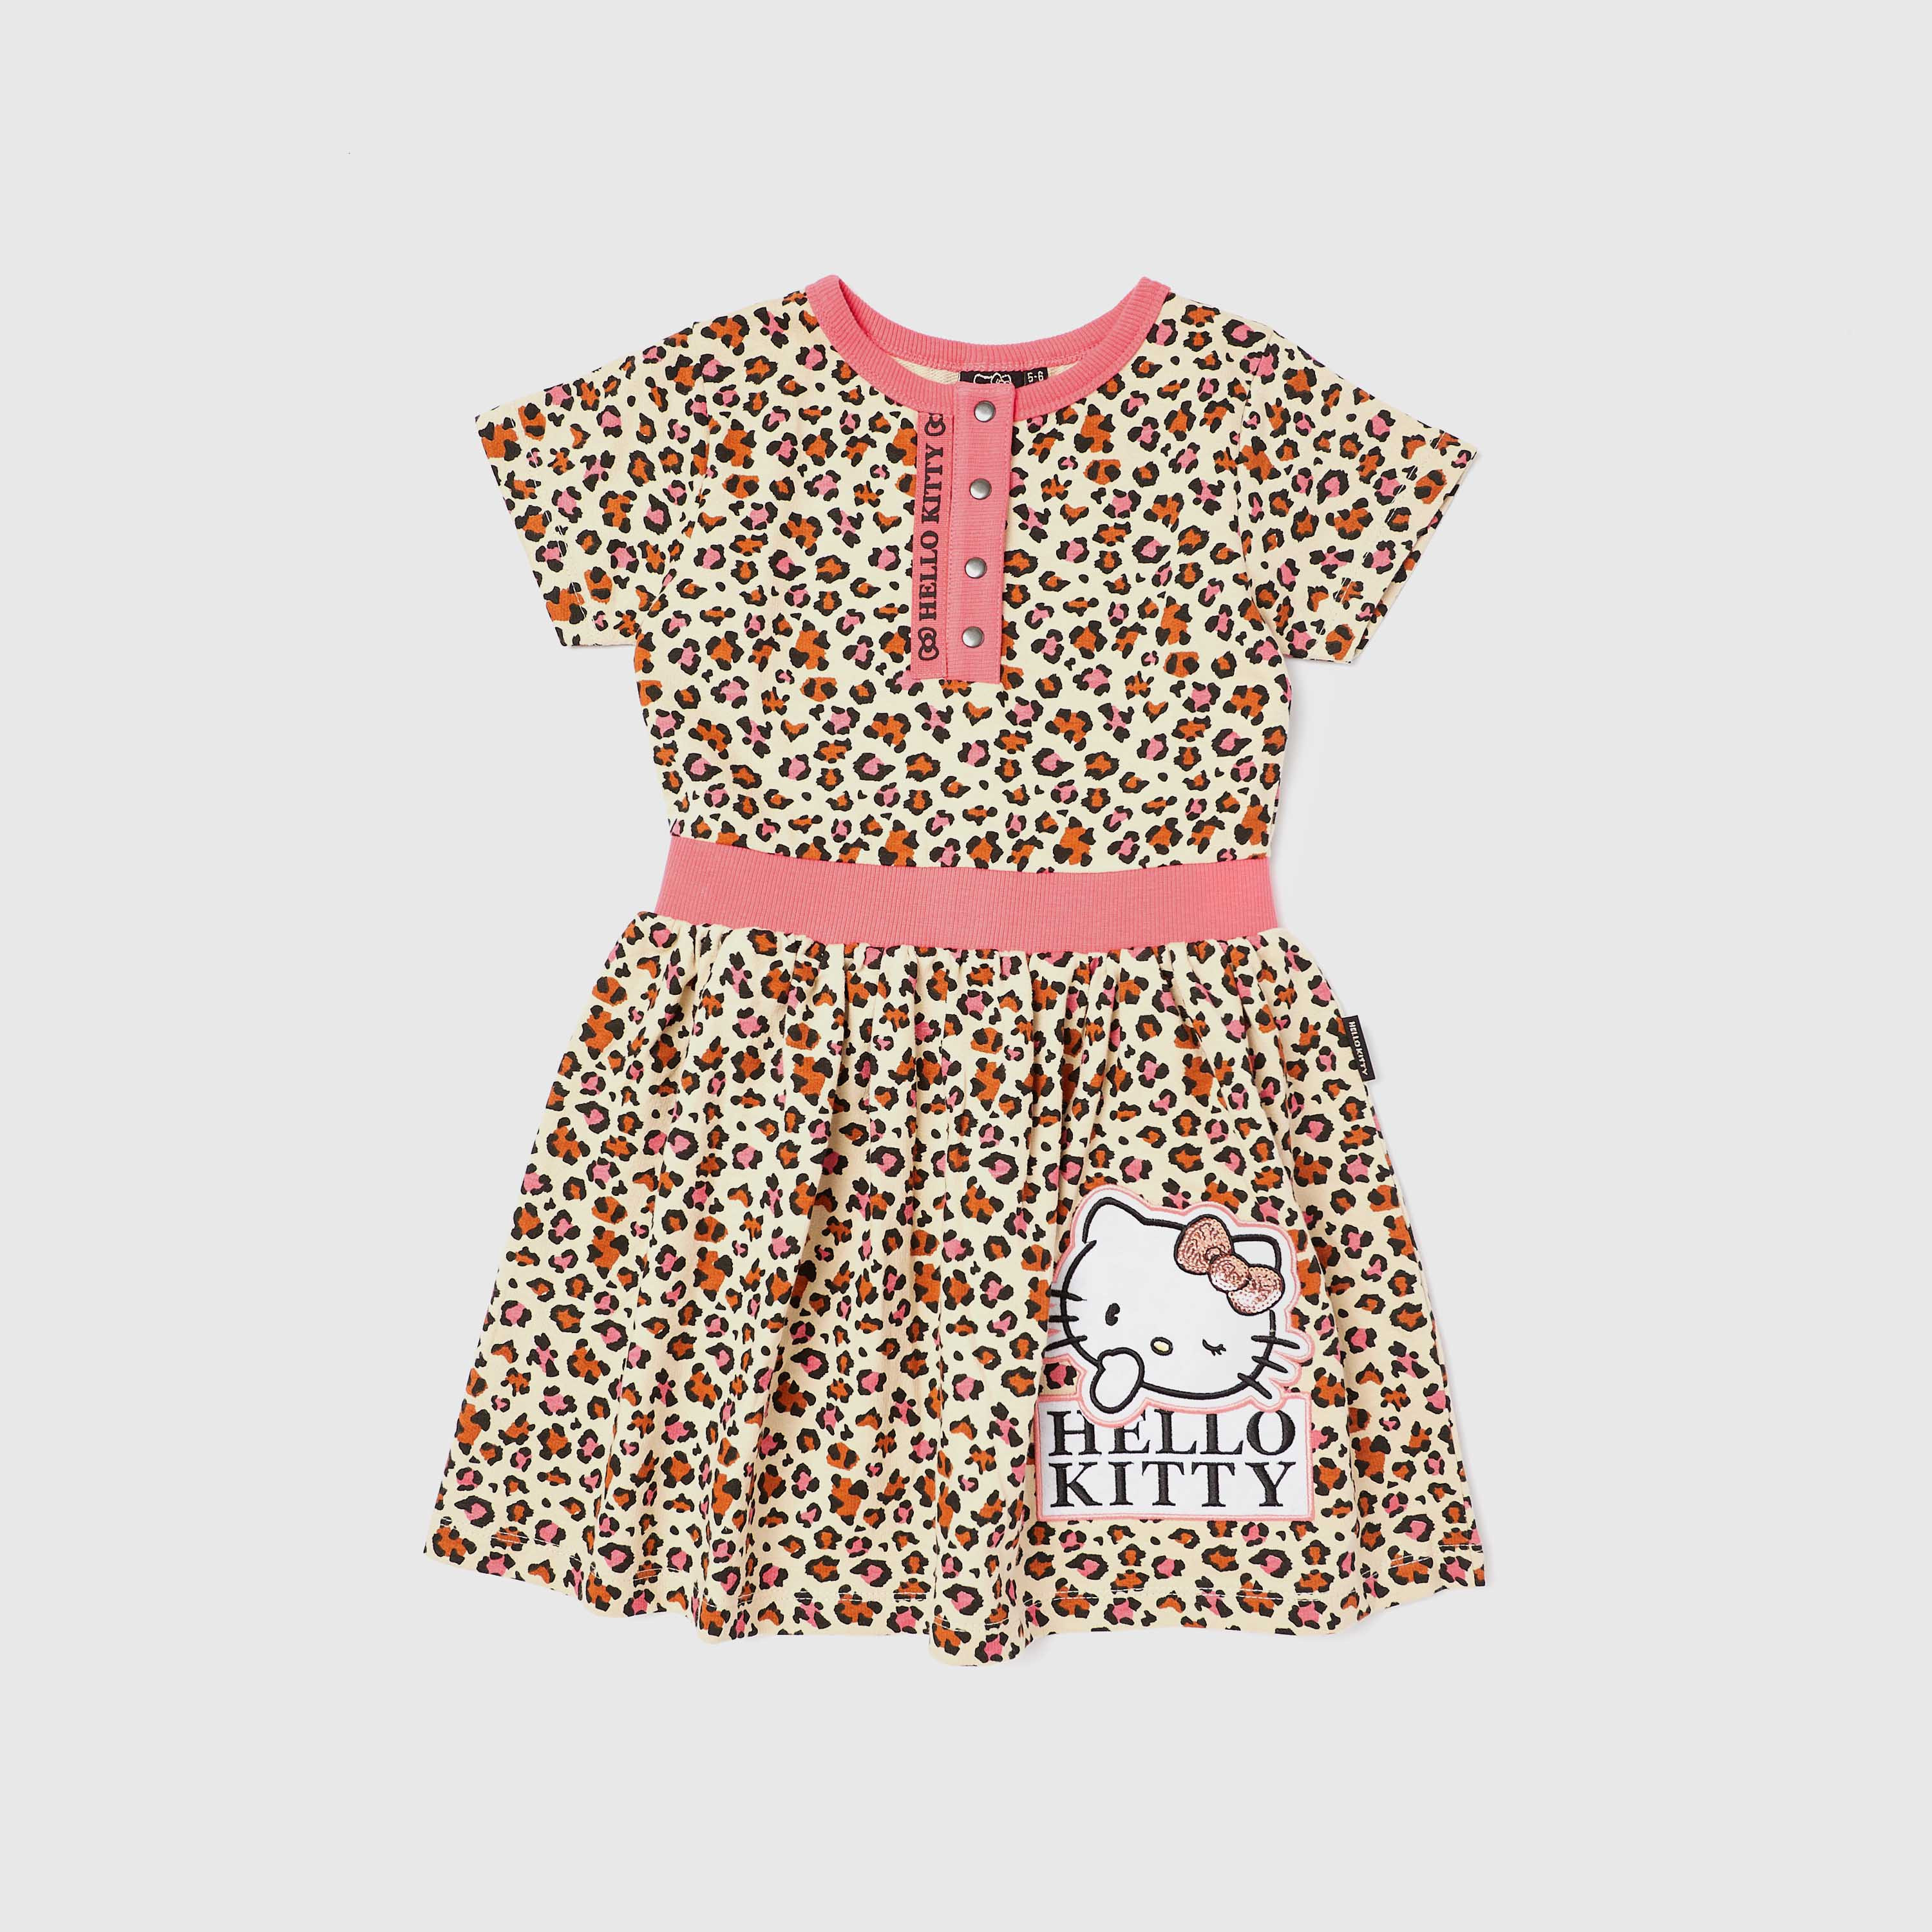 Hello Kitty Party Dress For Kids - Shop on Pinterest